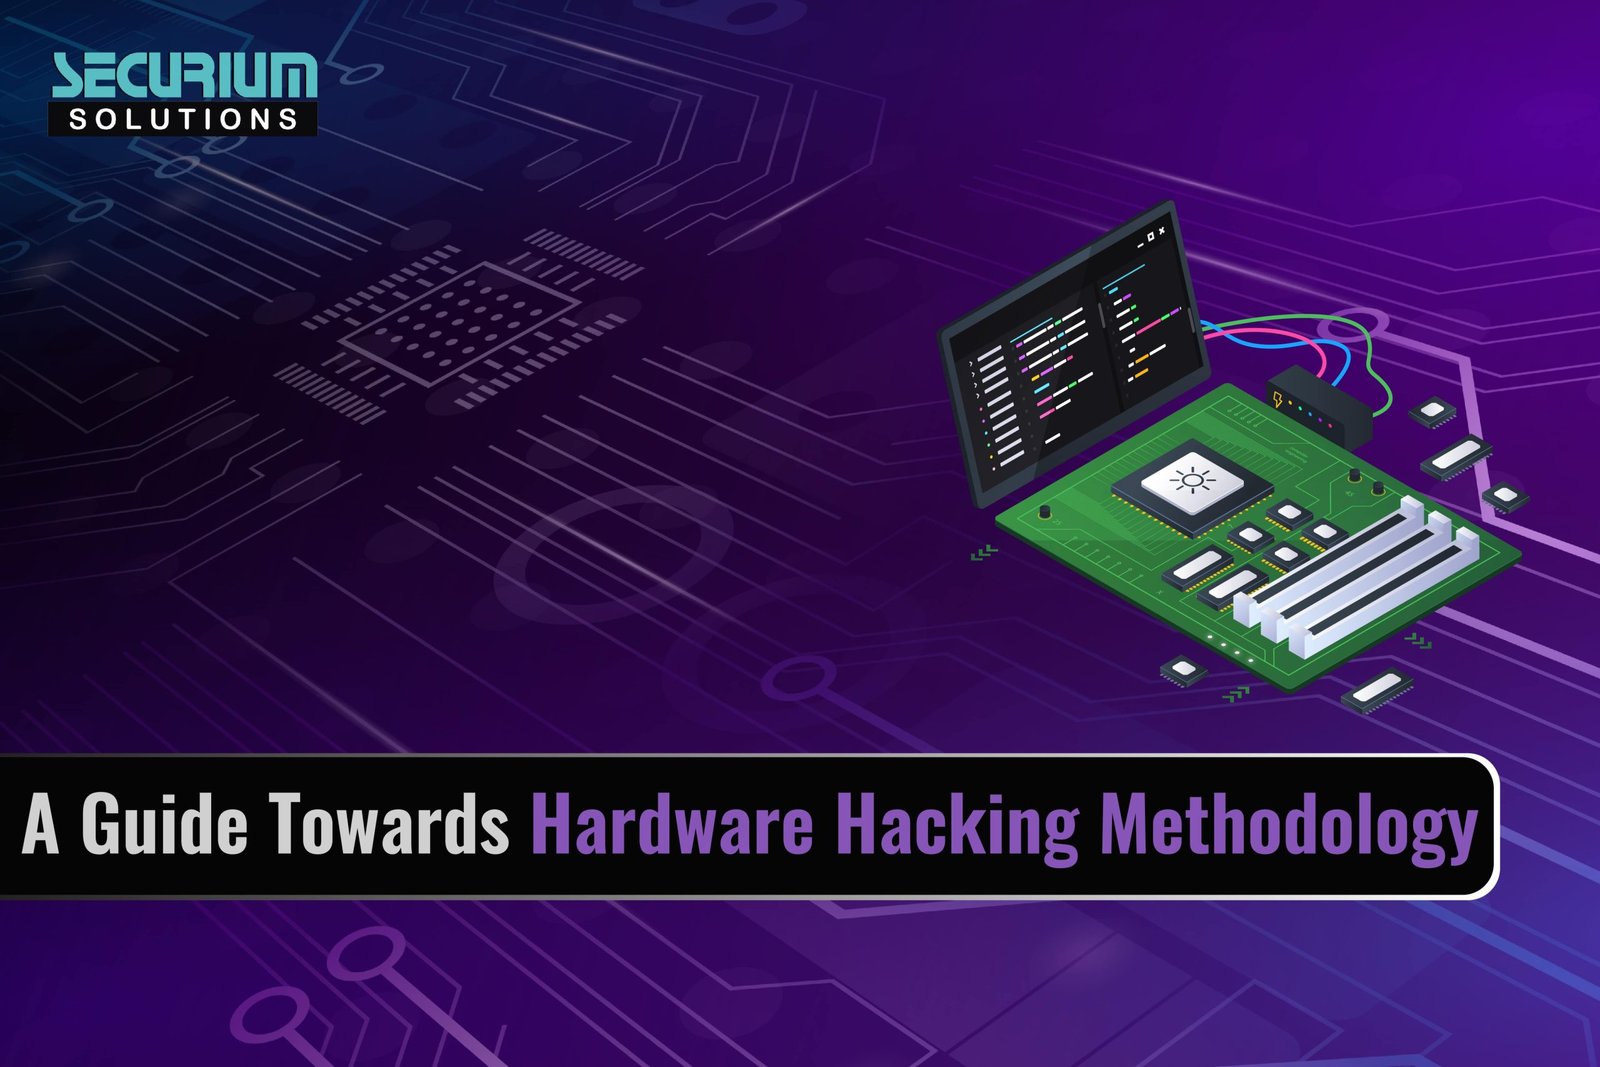 A Guide Towards Hardware Hacking Methodology - Securium Solutions